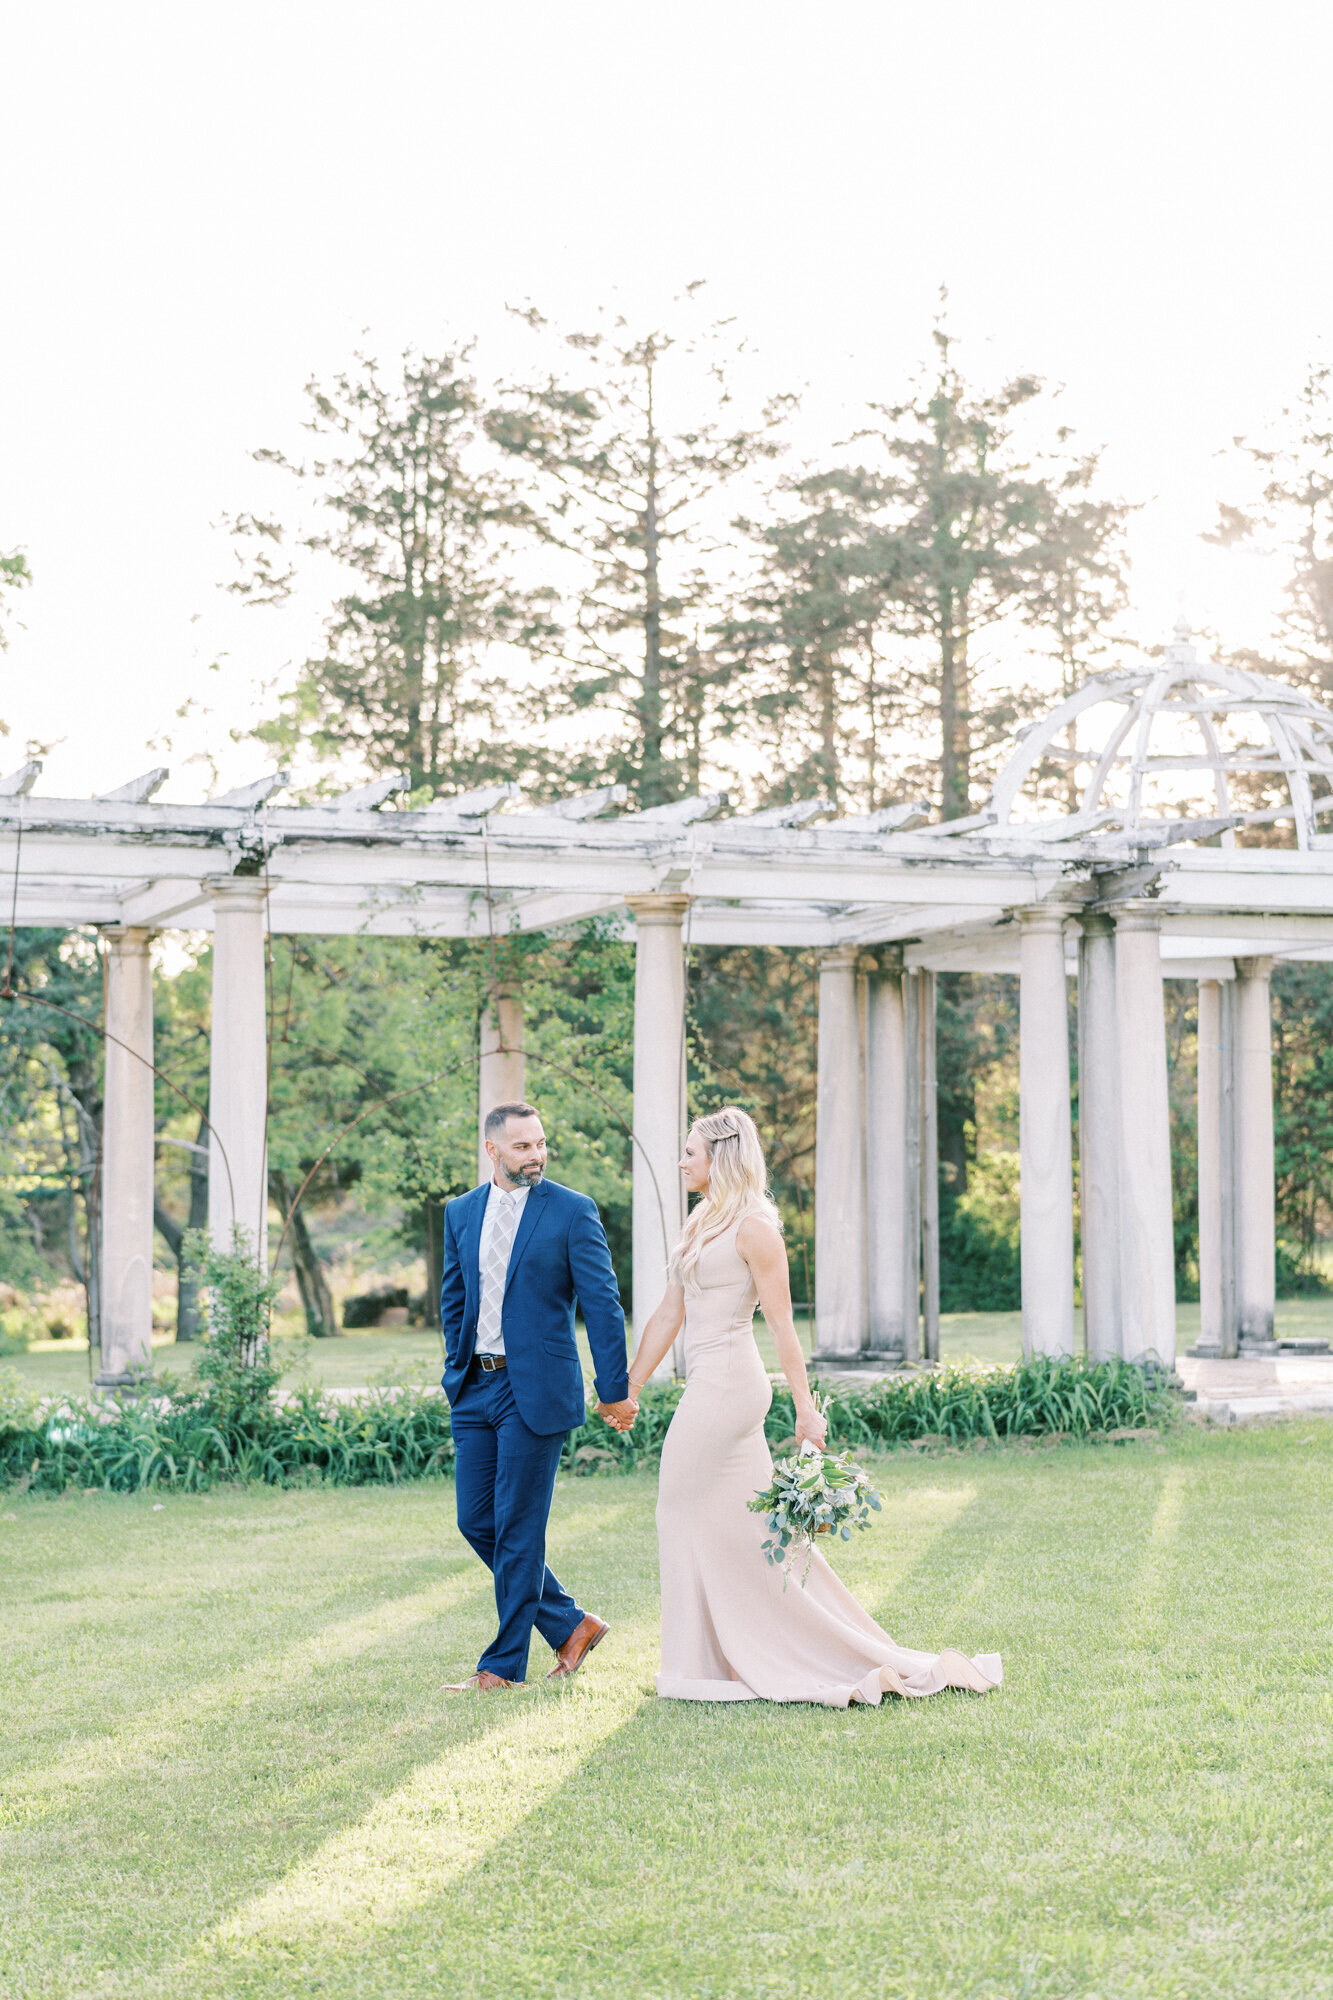 Bride and groom walk hand in hand at Swannanoa Palace